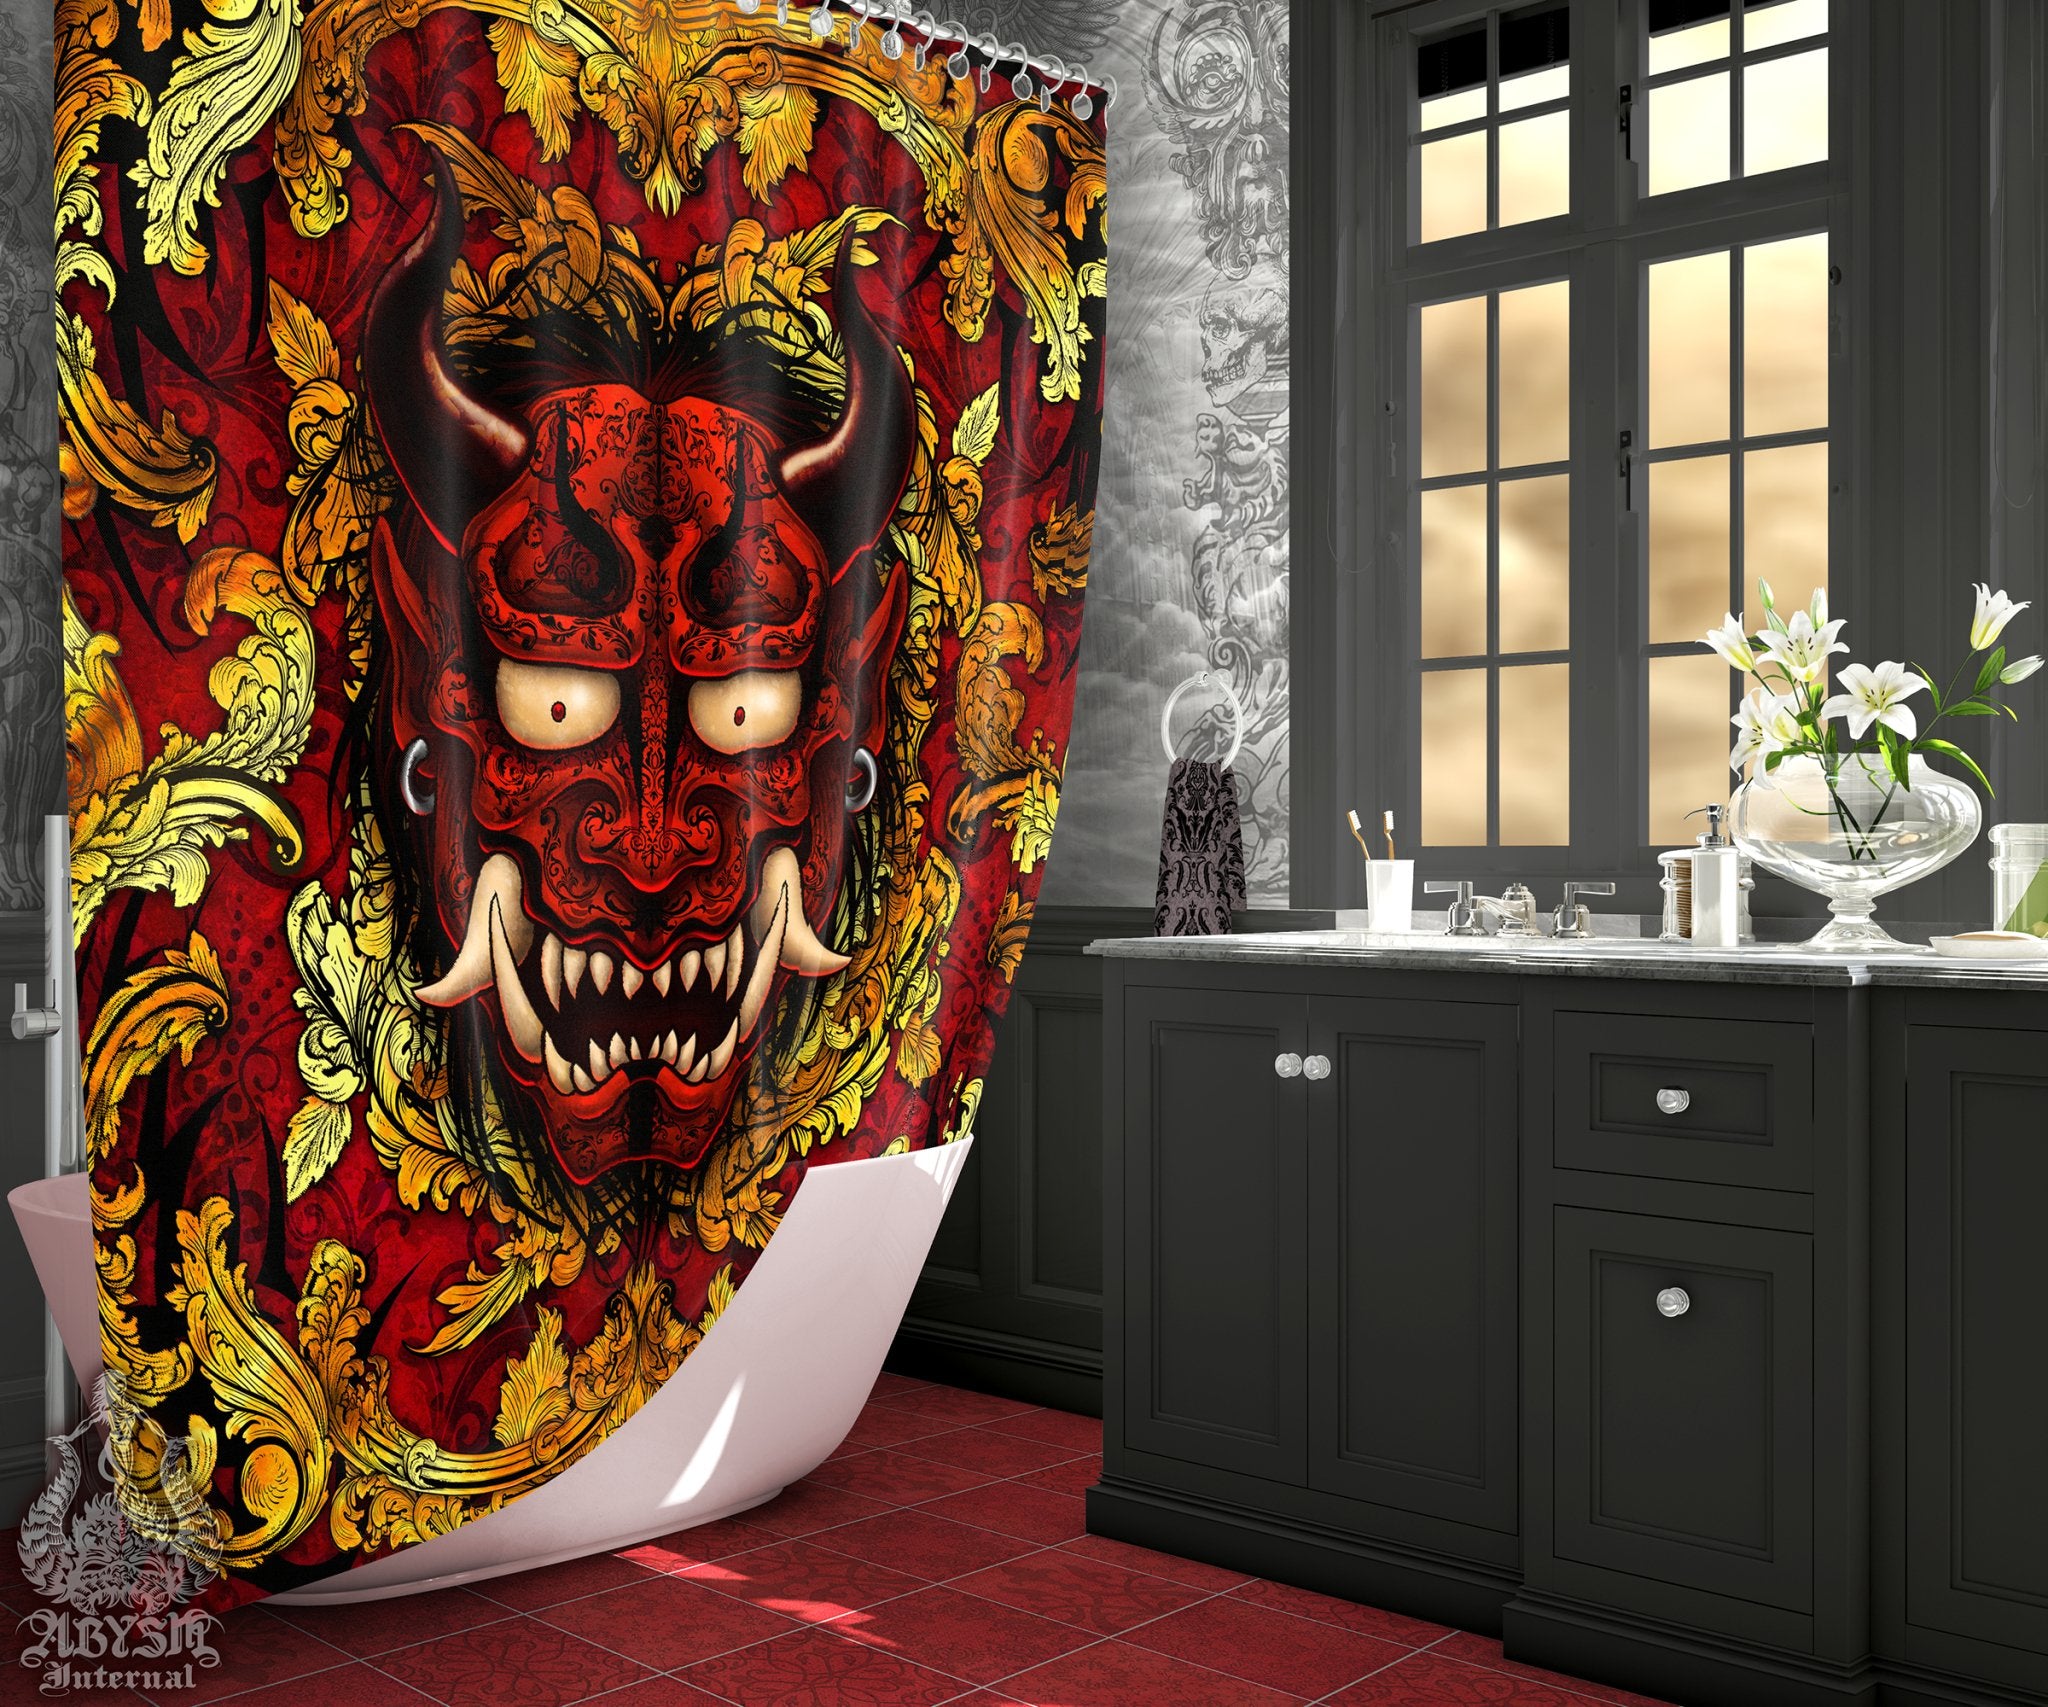 Anime Shower Curtain, 71x74 inches, Red Demon Bathroom Decor, Fantasy, Japanese Oni - Black, Silver or Gold, 4 Colors - Abysm Internal